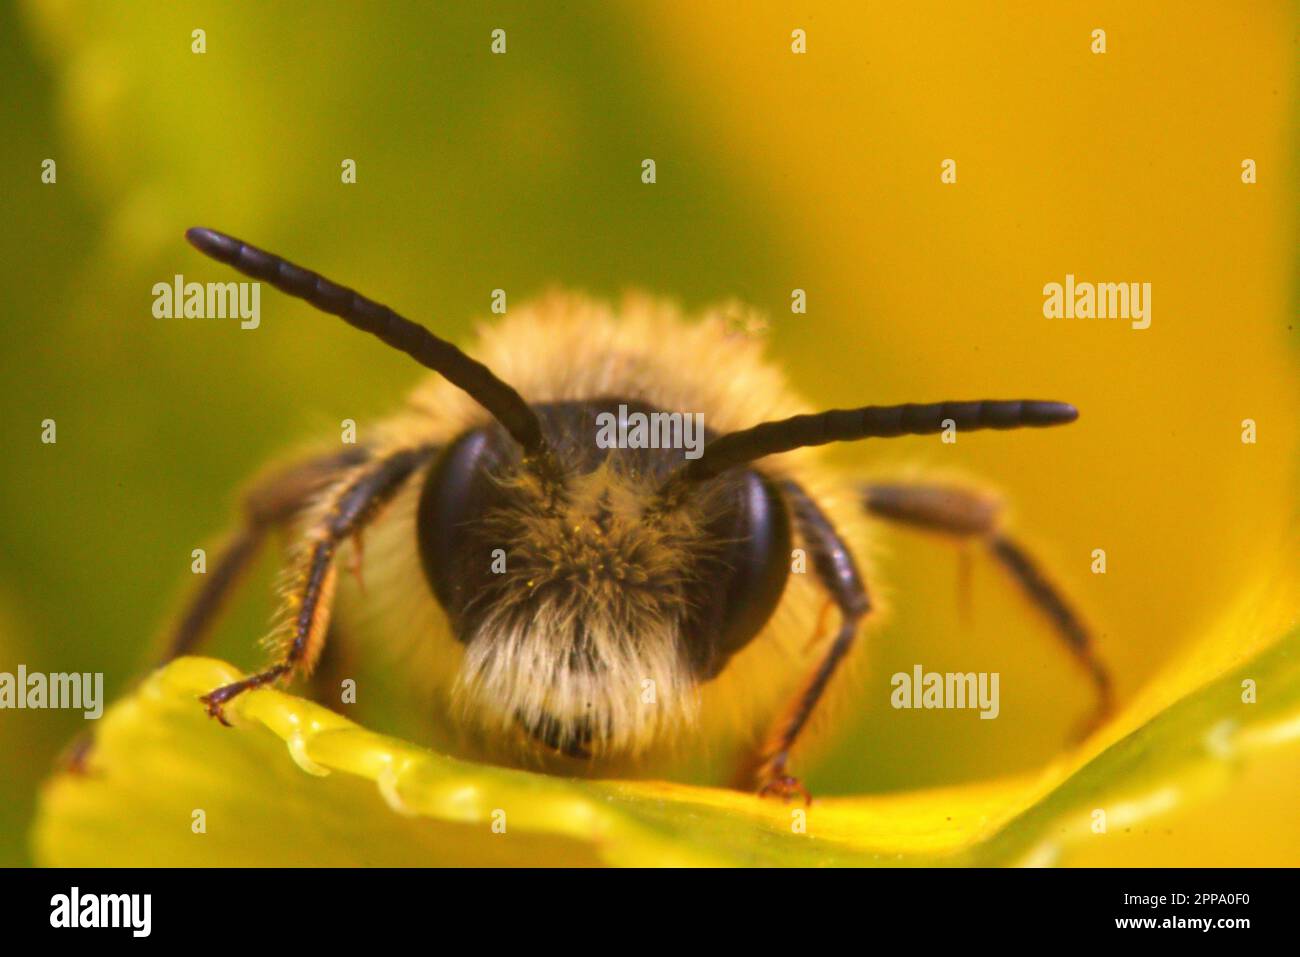 Solitary bee close up Stock Photo